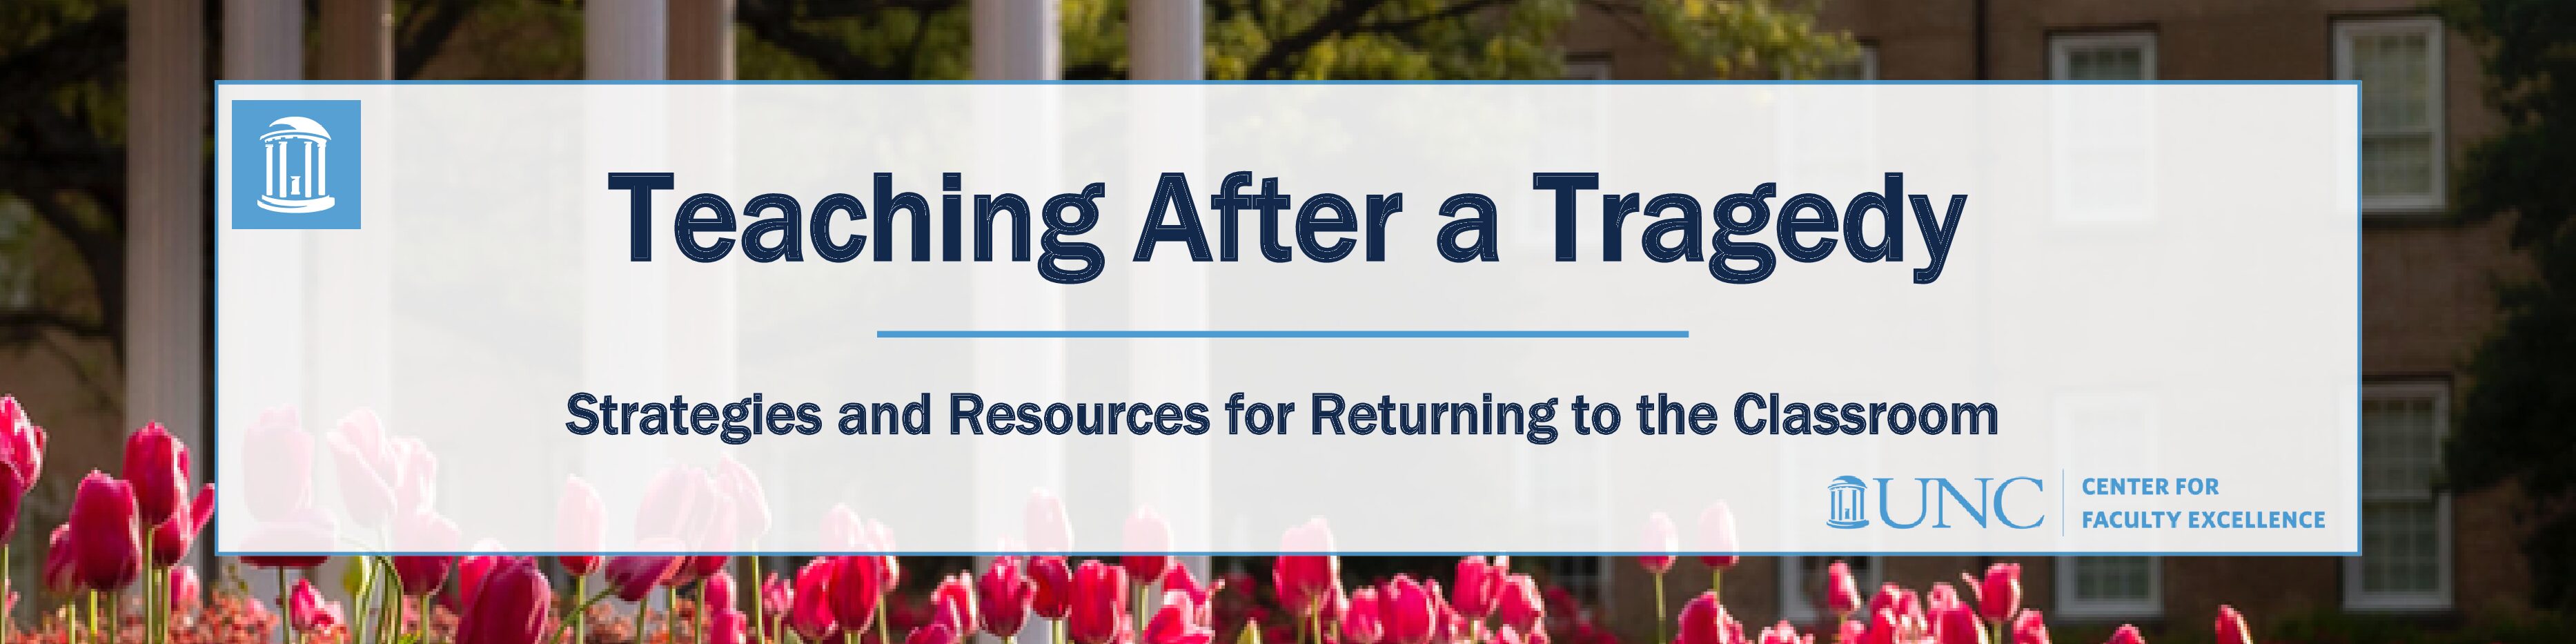 Teaching after a Tragedy: Strategies and resources for returning to the classroom